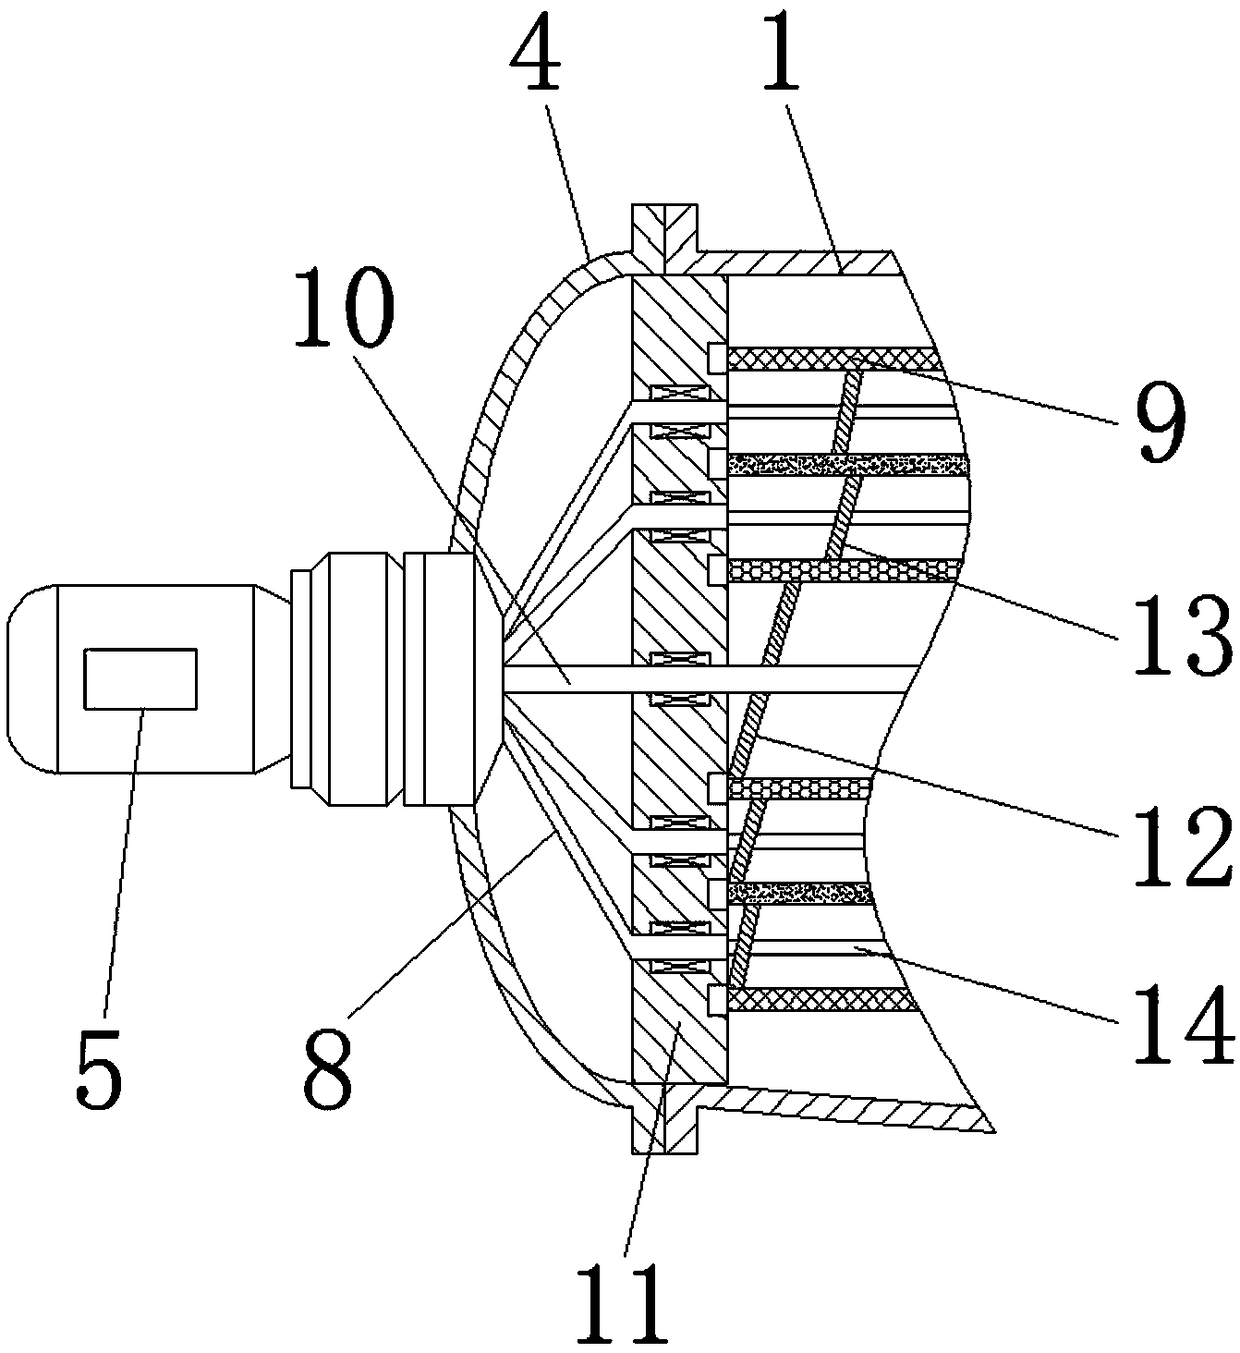 Graded filtering device for water purification treatment of waterworks